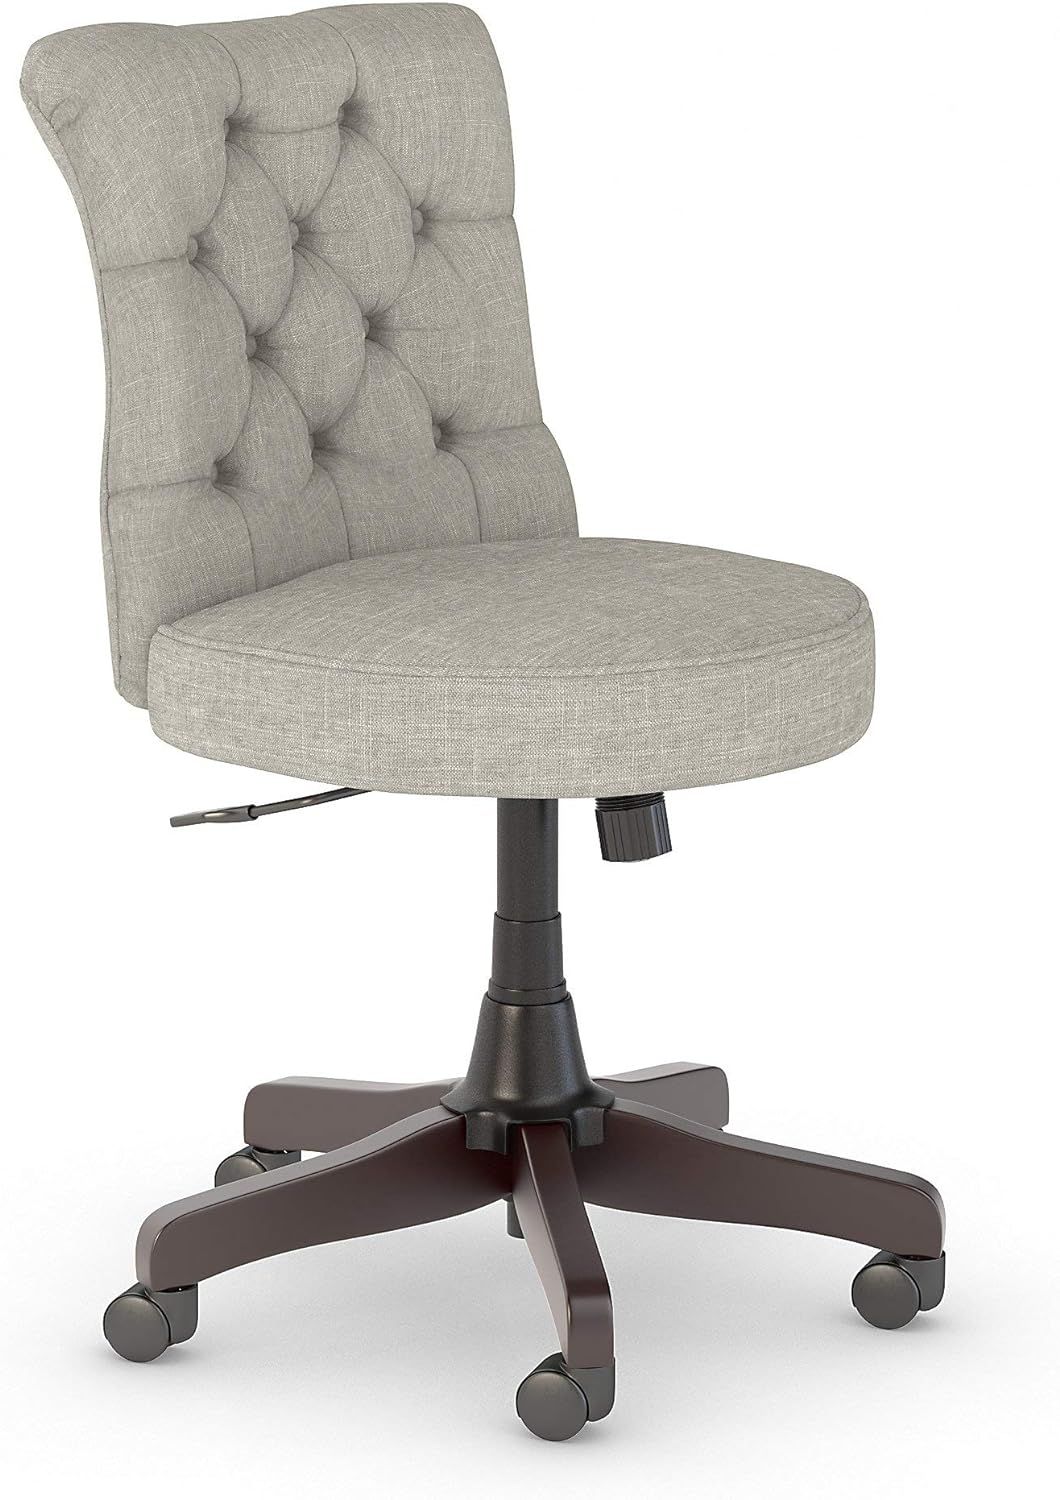 Bush Furniture Key West Mid Back Tufted Office Chair, Light Gray Fabric | Amazon (US)